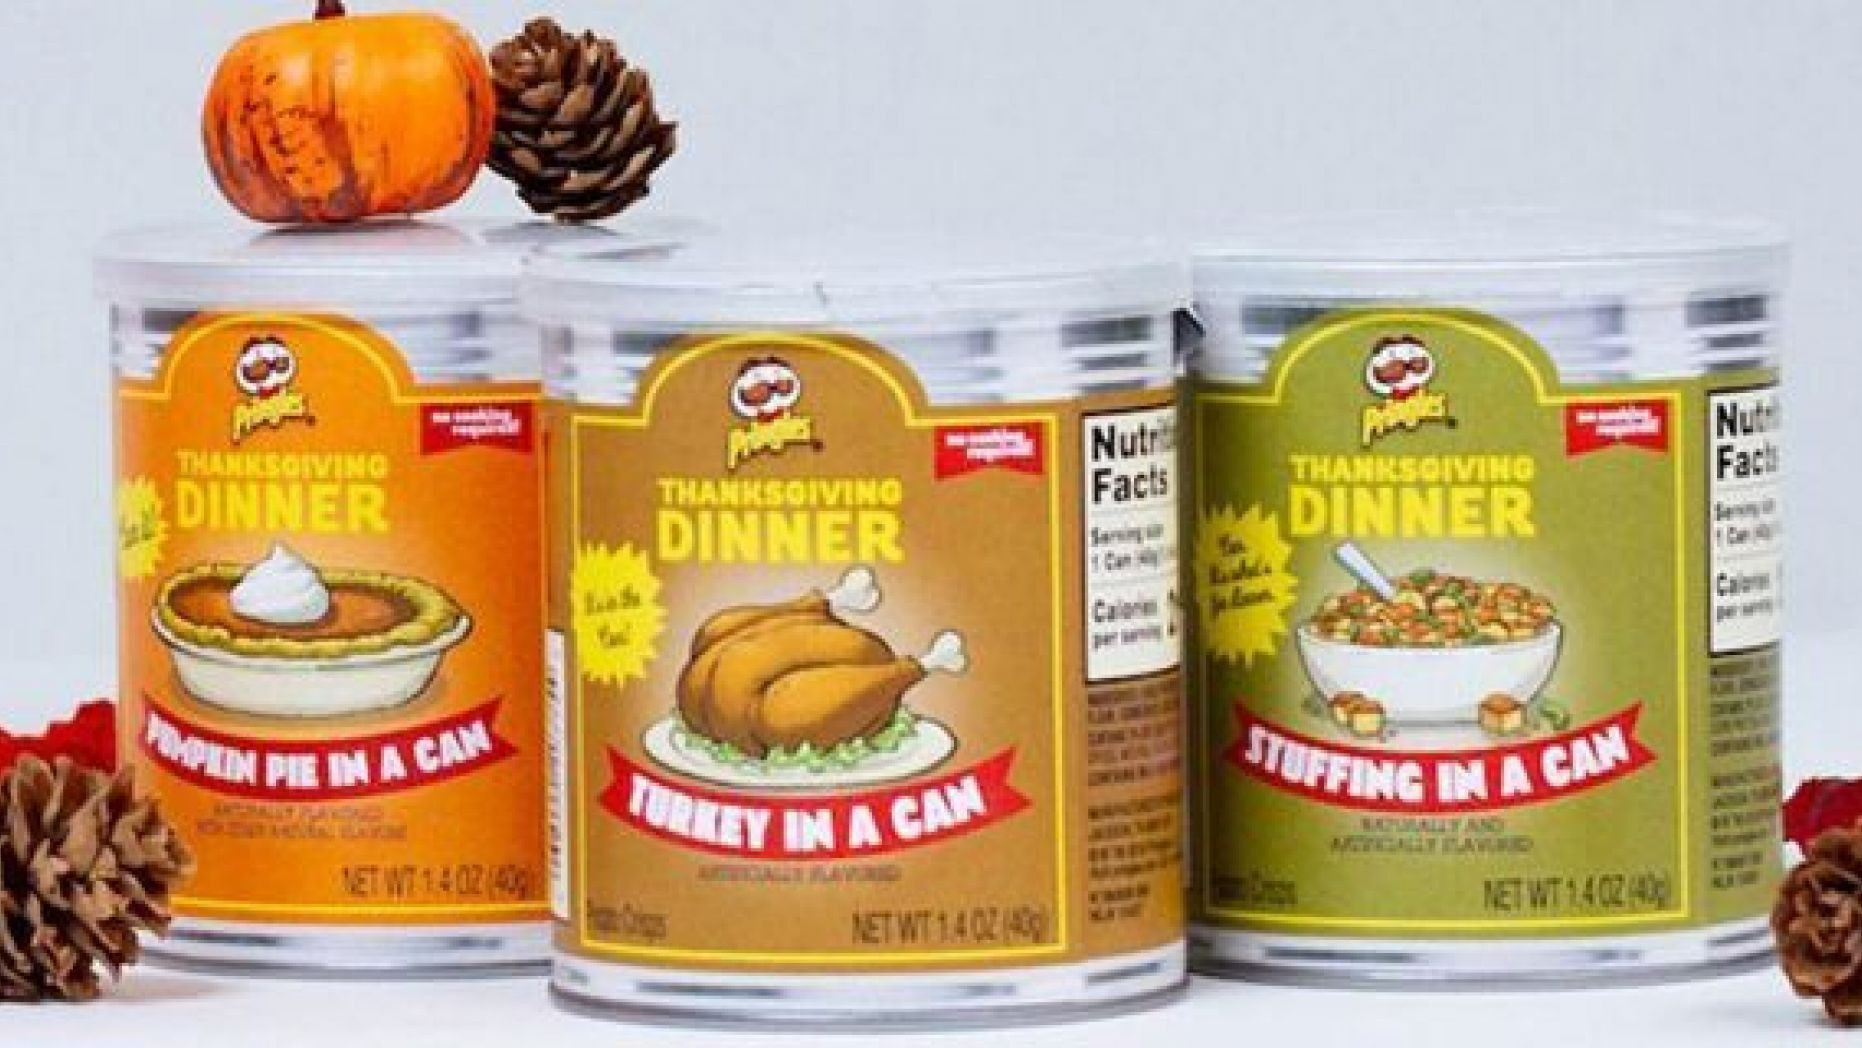 Craig'S Thanksgiving Dinner In A Can
 Pringles selling Thanksgiving dinner in a can with latest